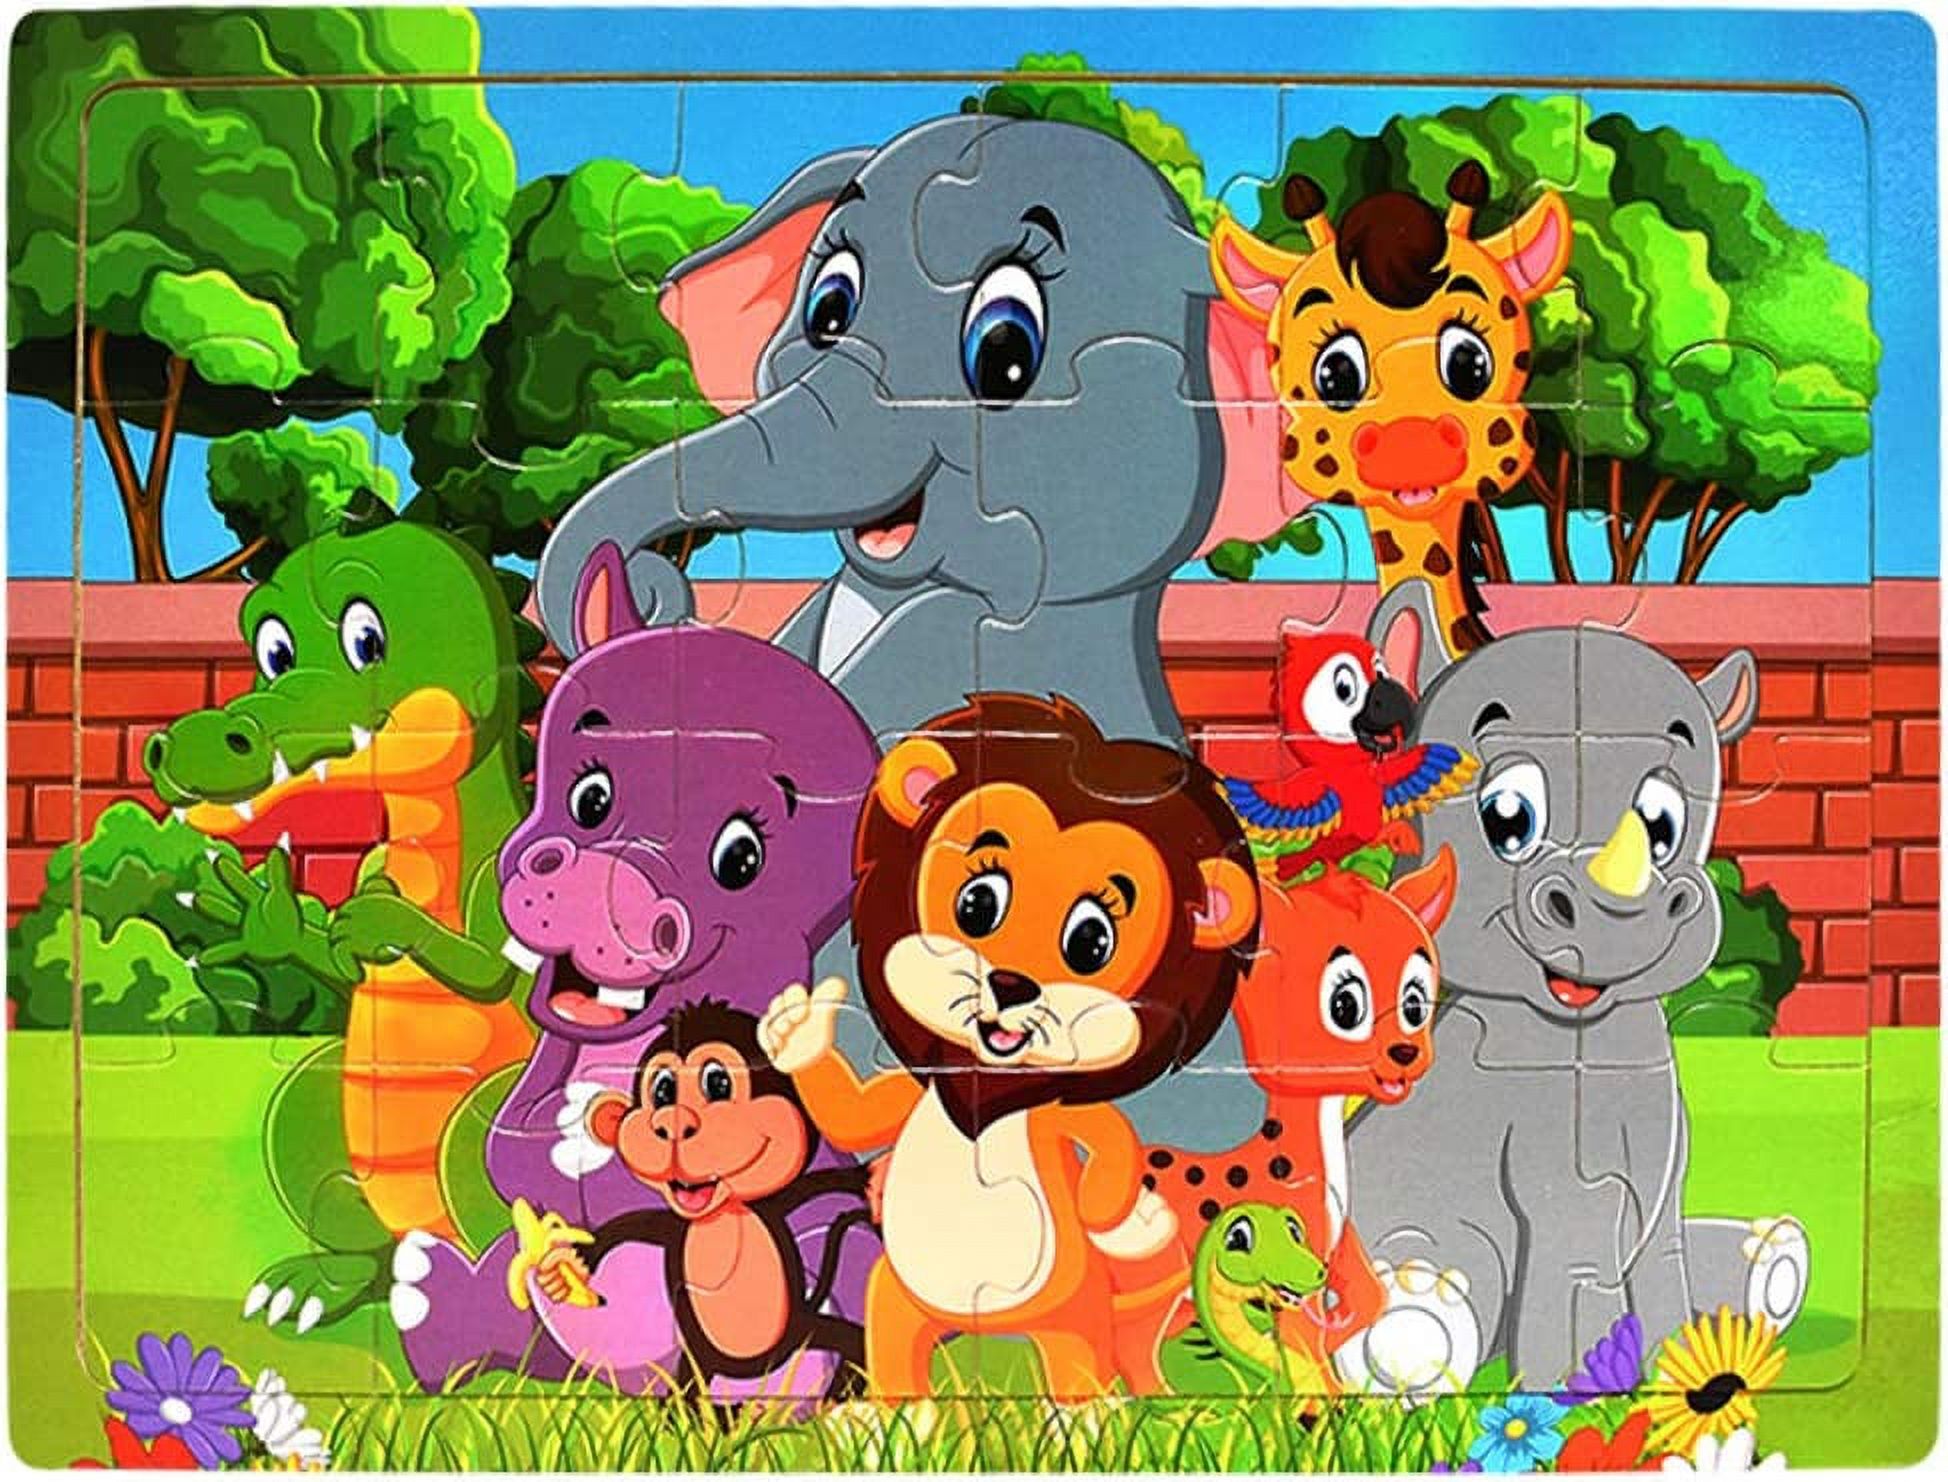 Wooden Puzzles for Kids Ages 2-5 - 24 Piece Puzzle for Toddlers Preschool Kids Jigsaw Puzzles - 4 Pack Vibrant Children Theme Learning Educational Puzzle Set for Kids 2 3 4 5 Year Old - image 2 of 7